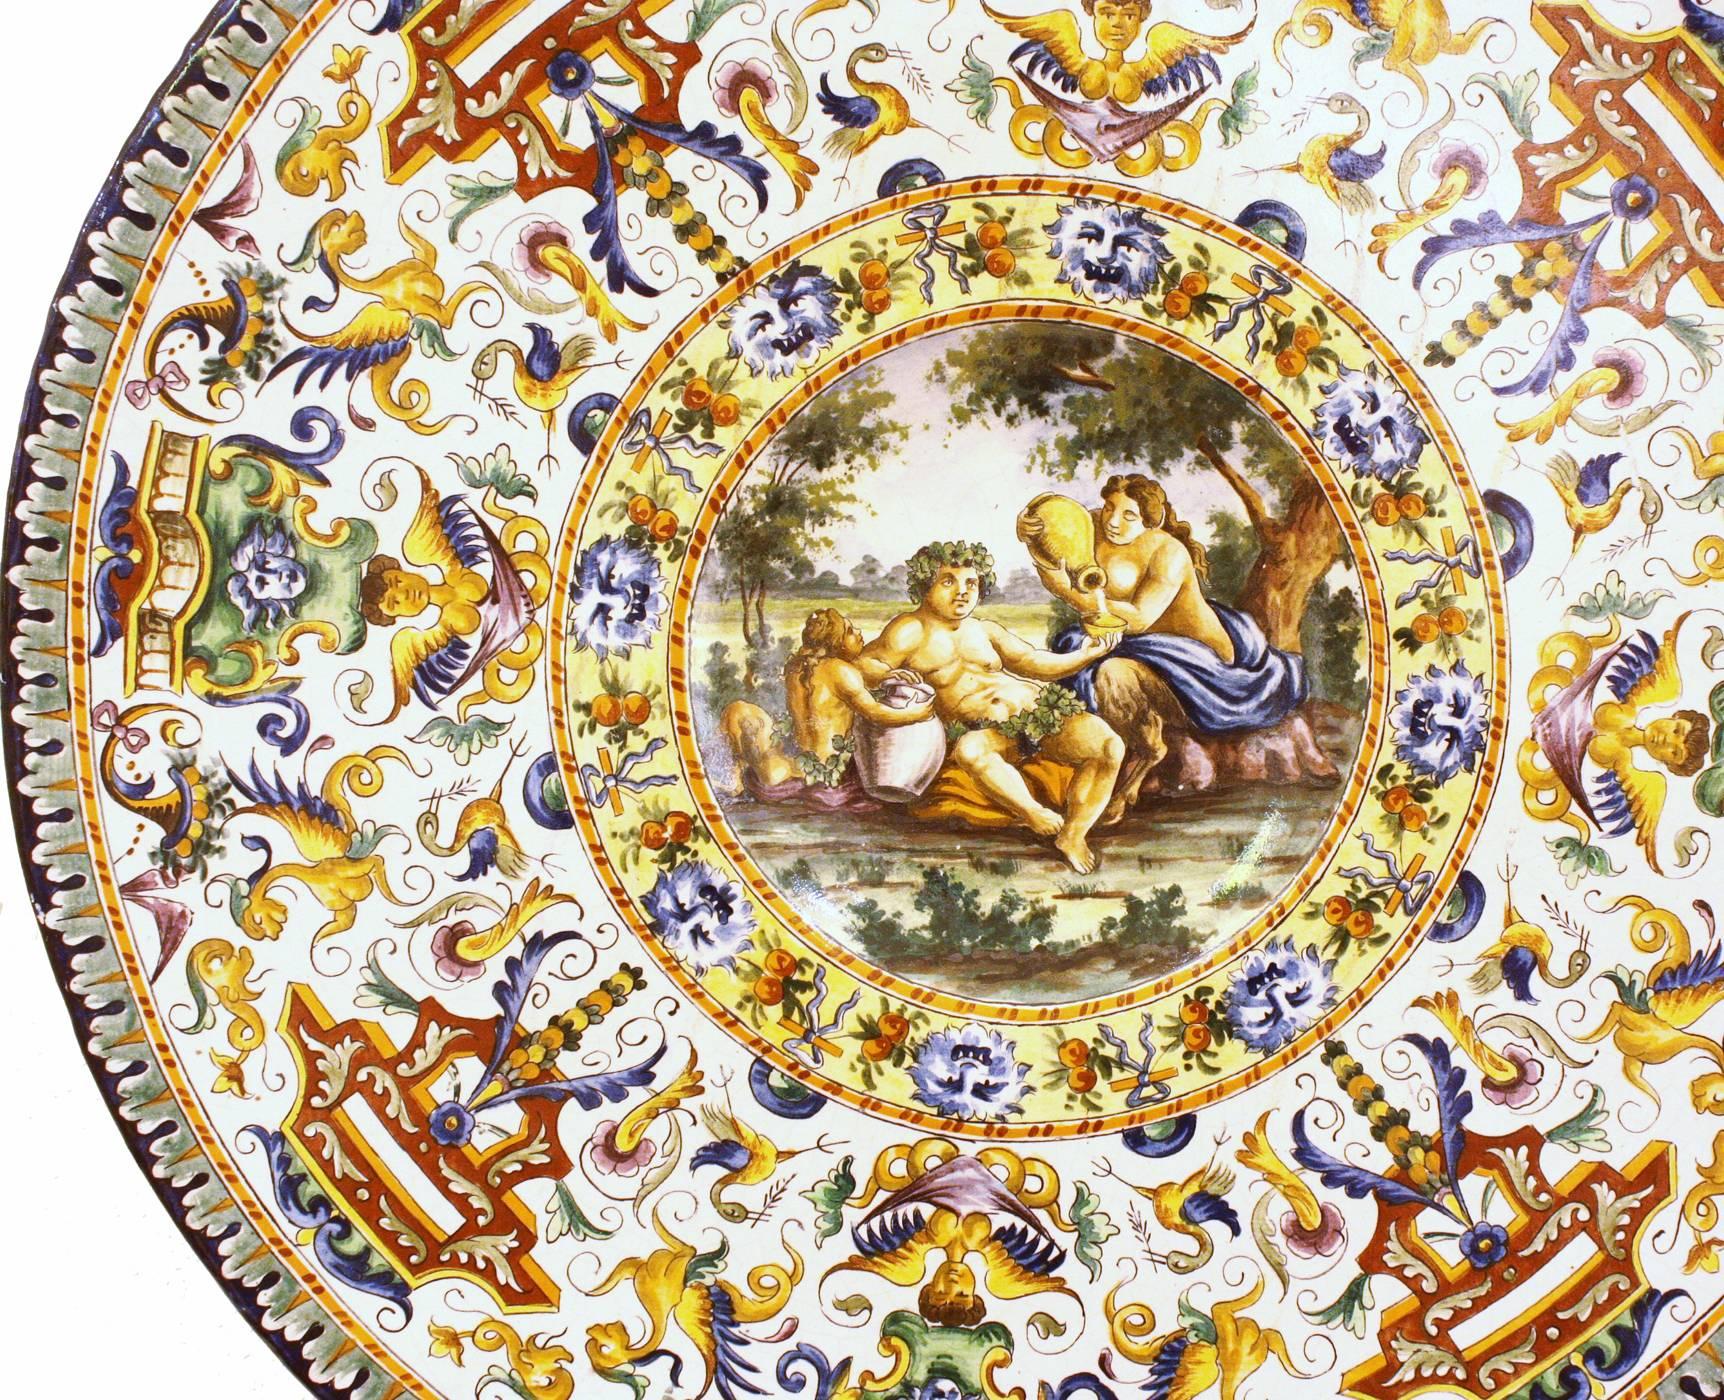 Pottery Large Italian Renaissance-Style Majolica Chargers